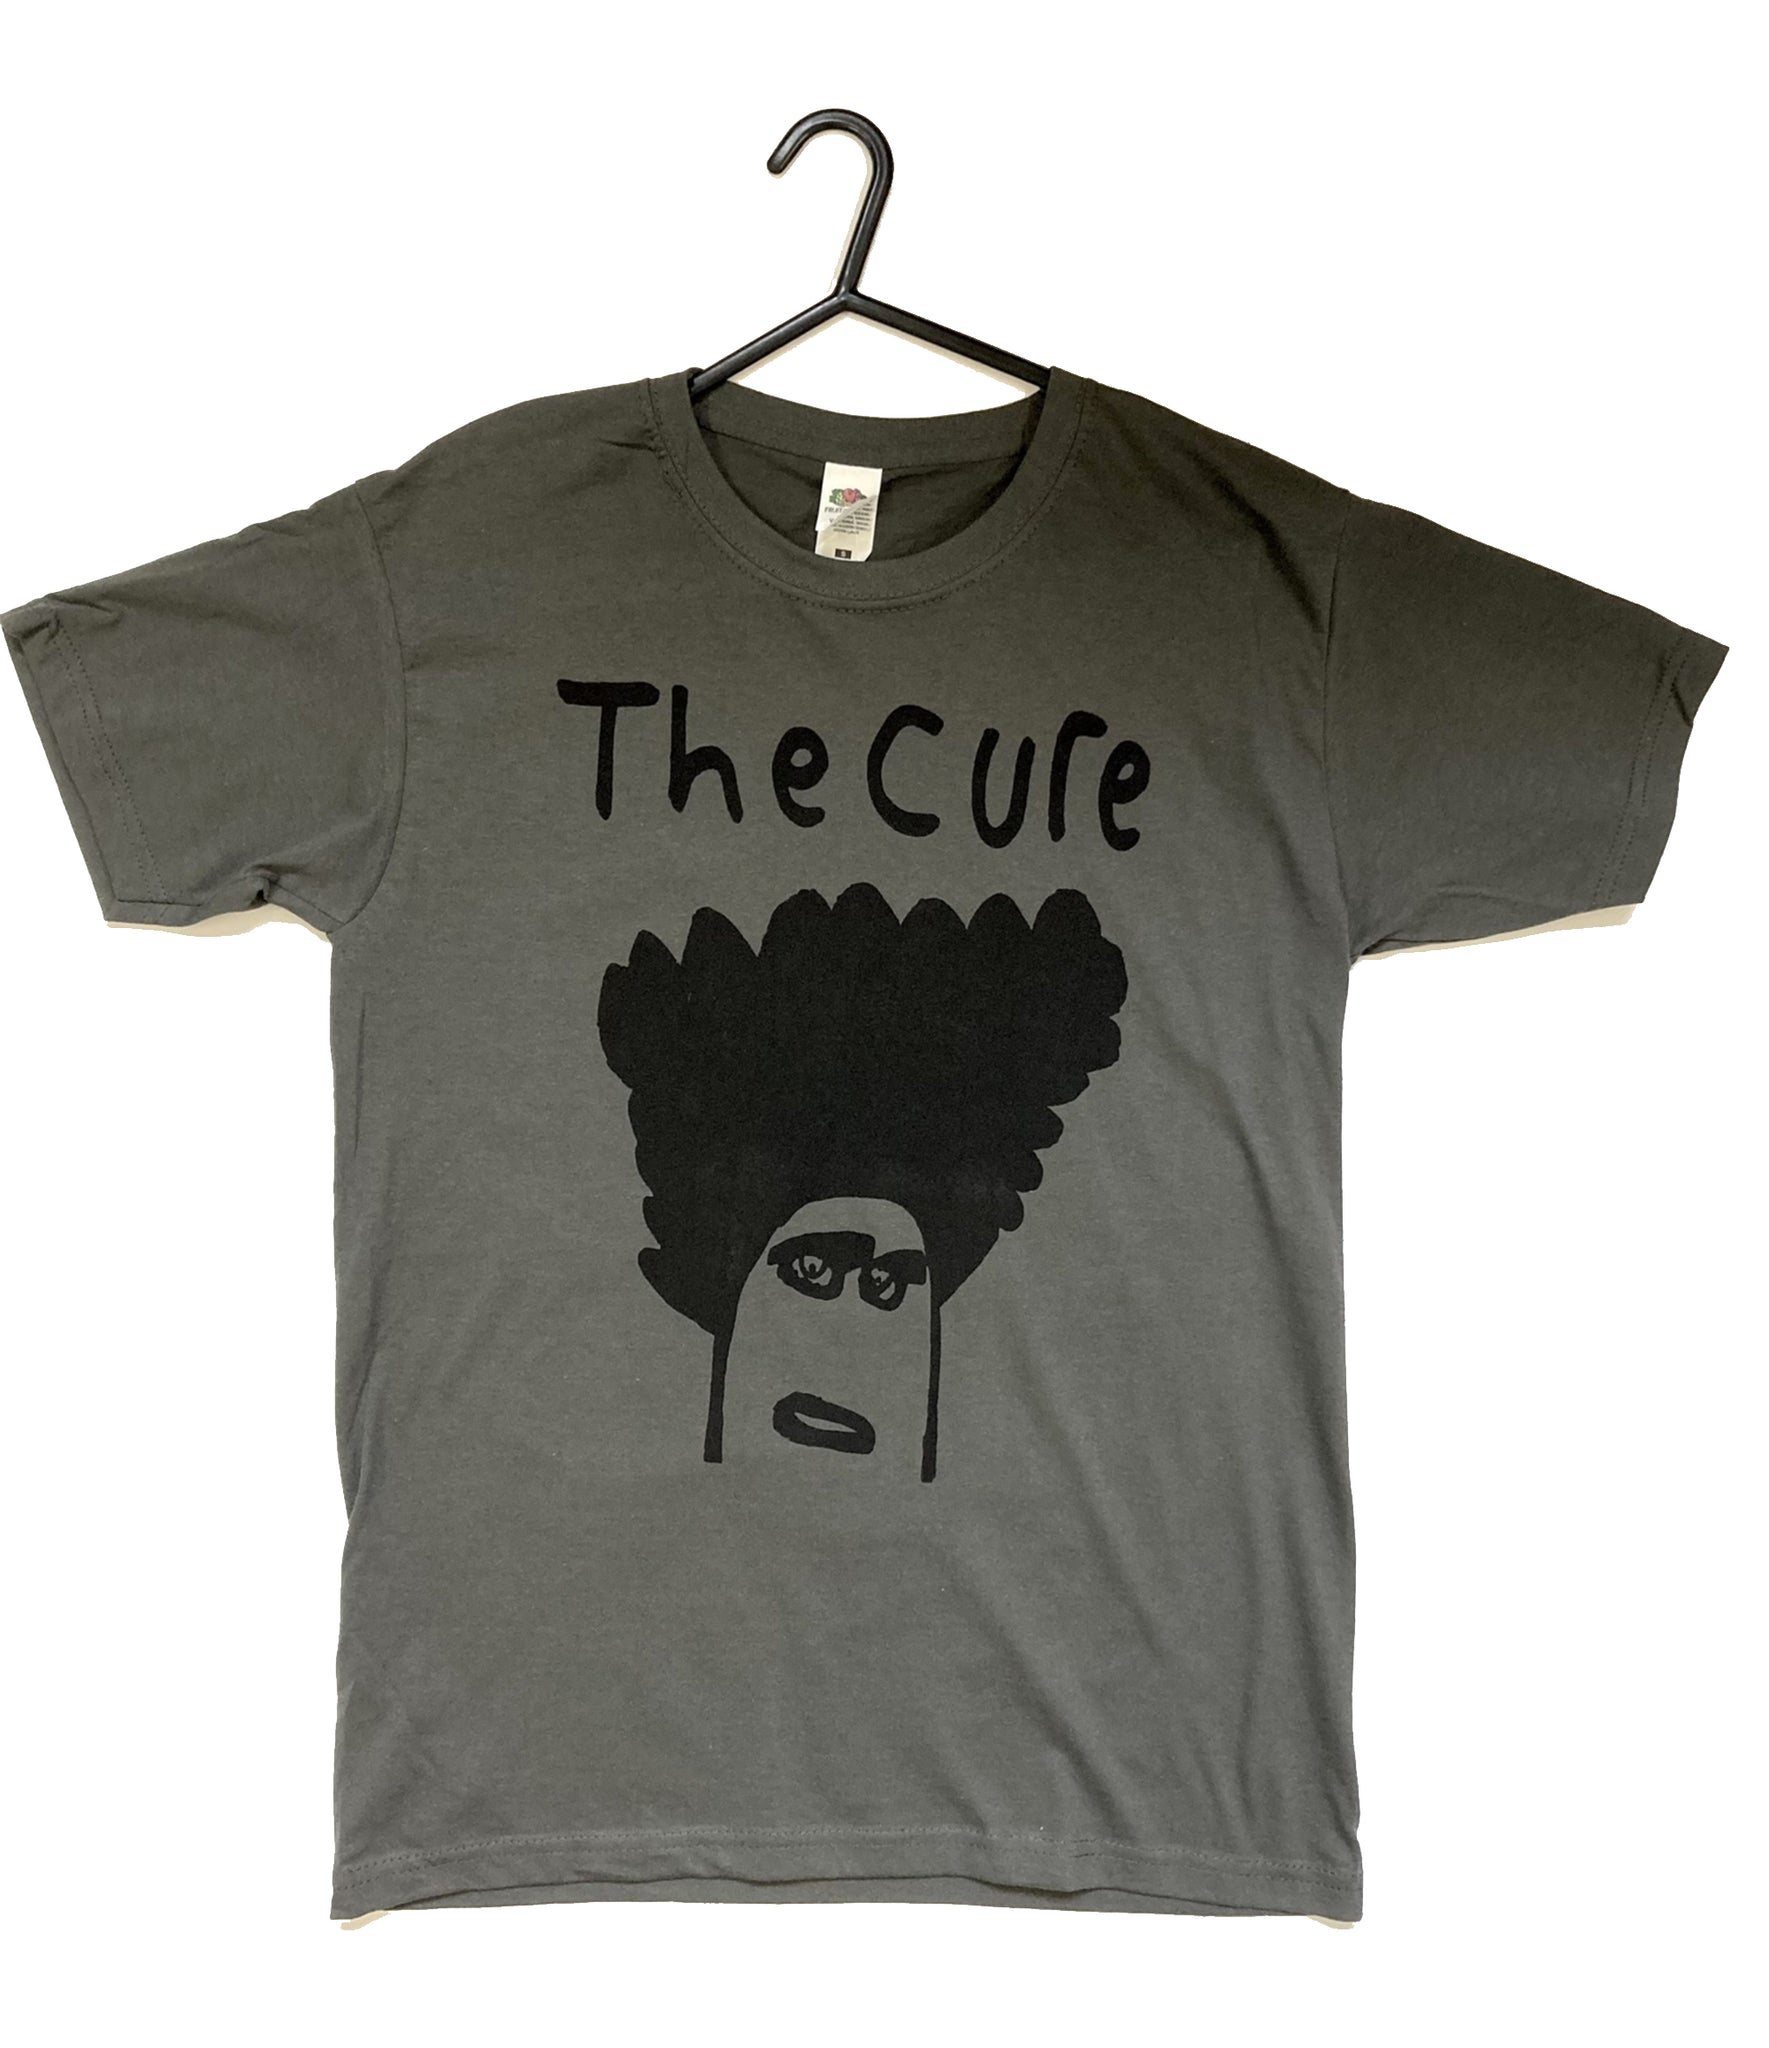 The Cure grey adult t-shirt